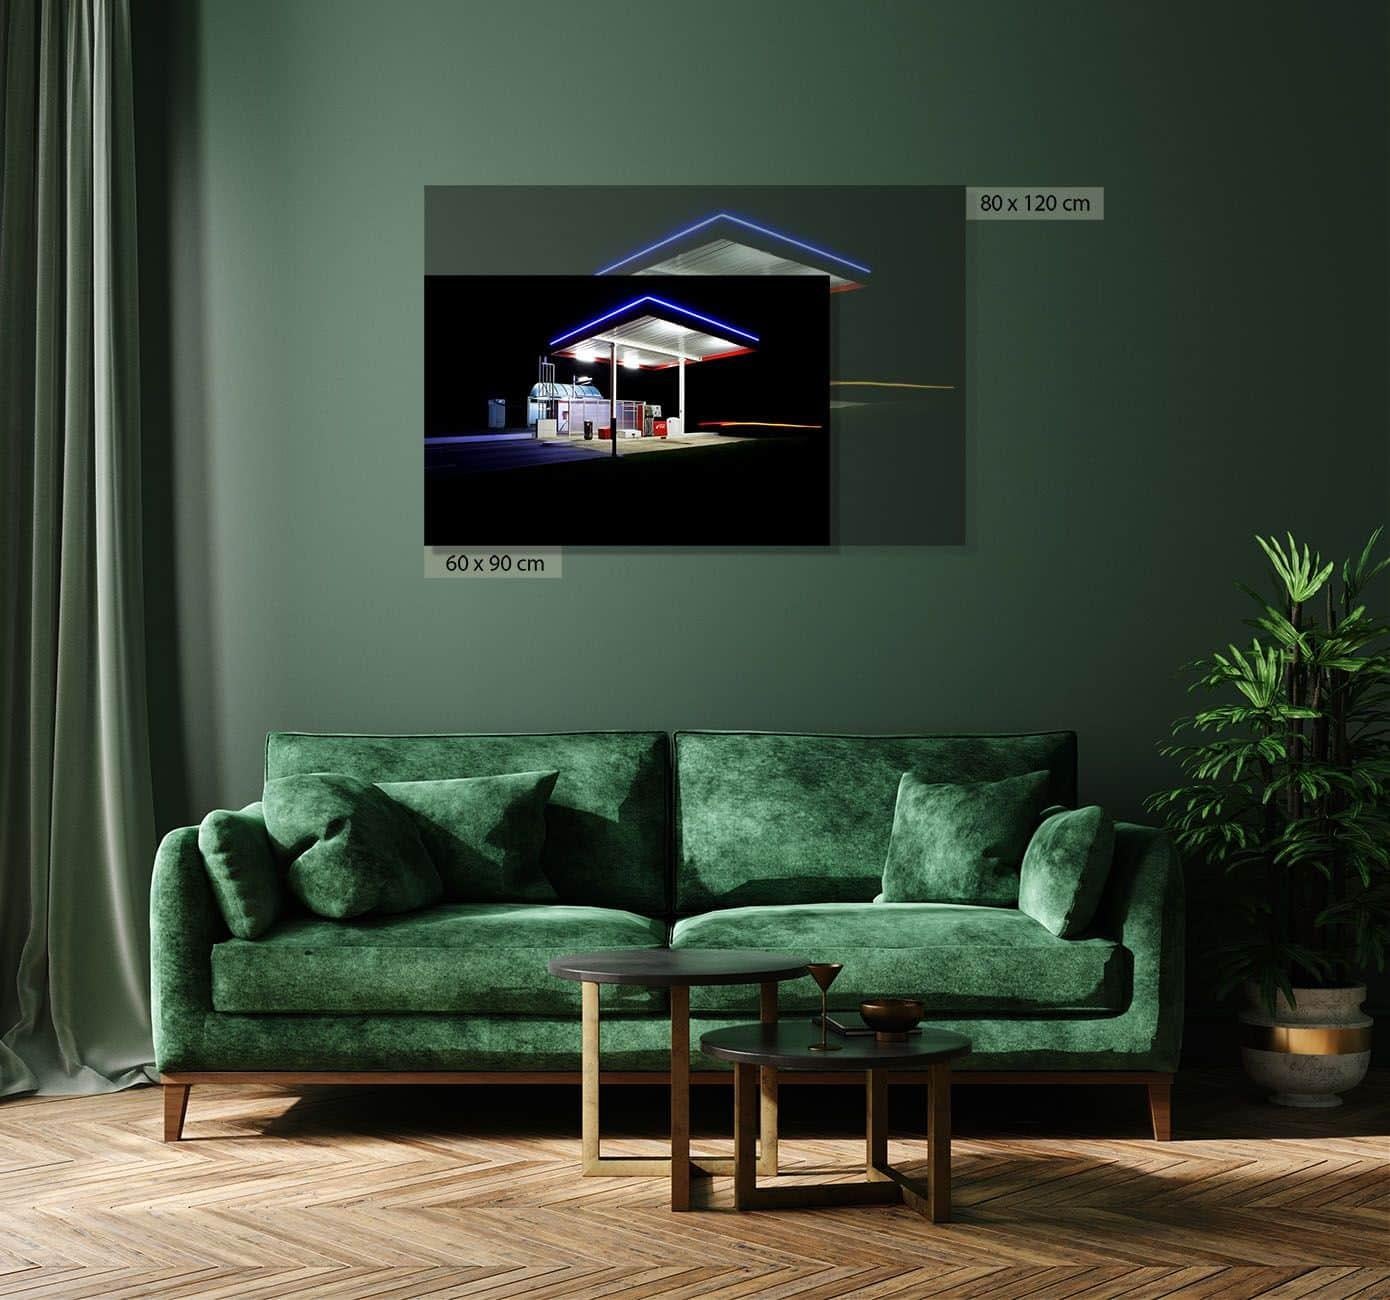 Fresh Start by Xavier Dumoulin - Contemporary night photography, dark neon color For Sale 1